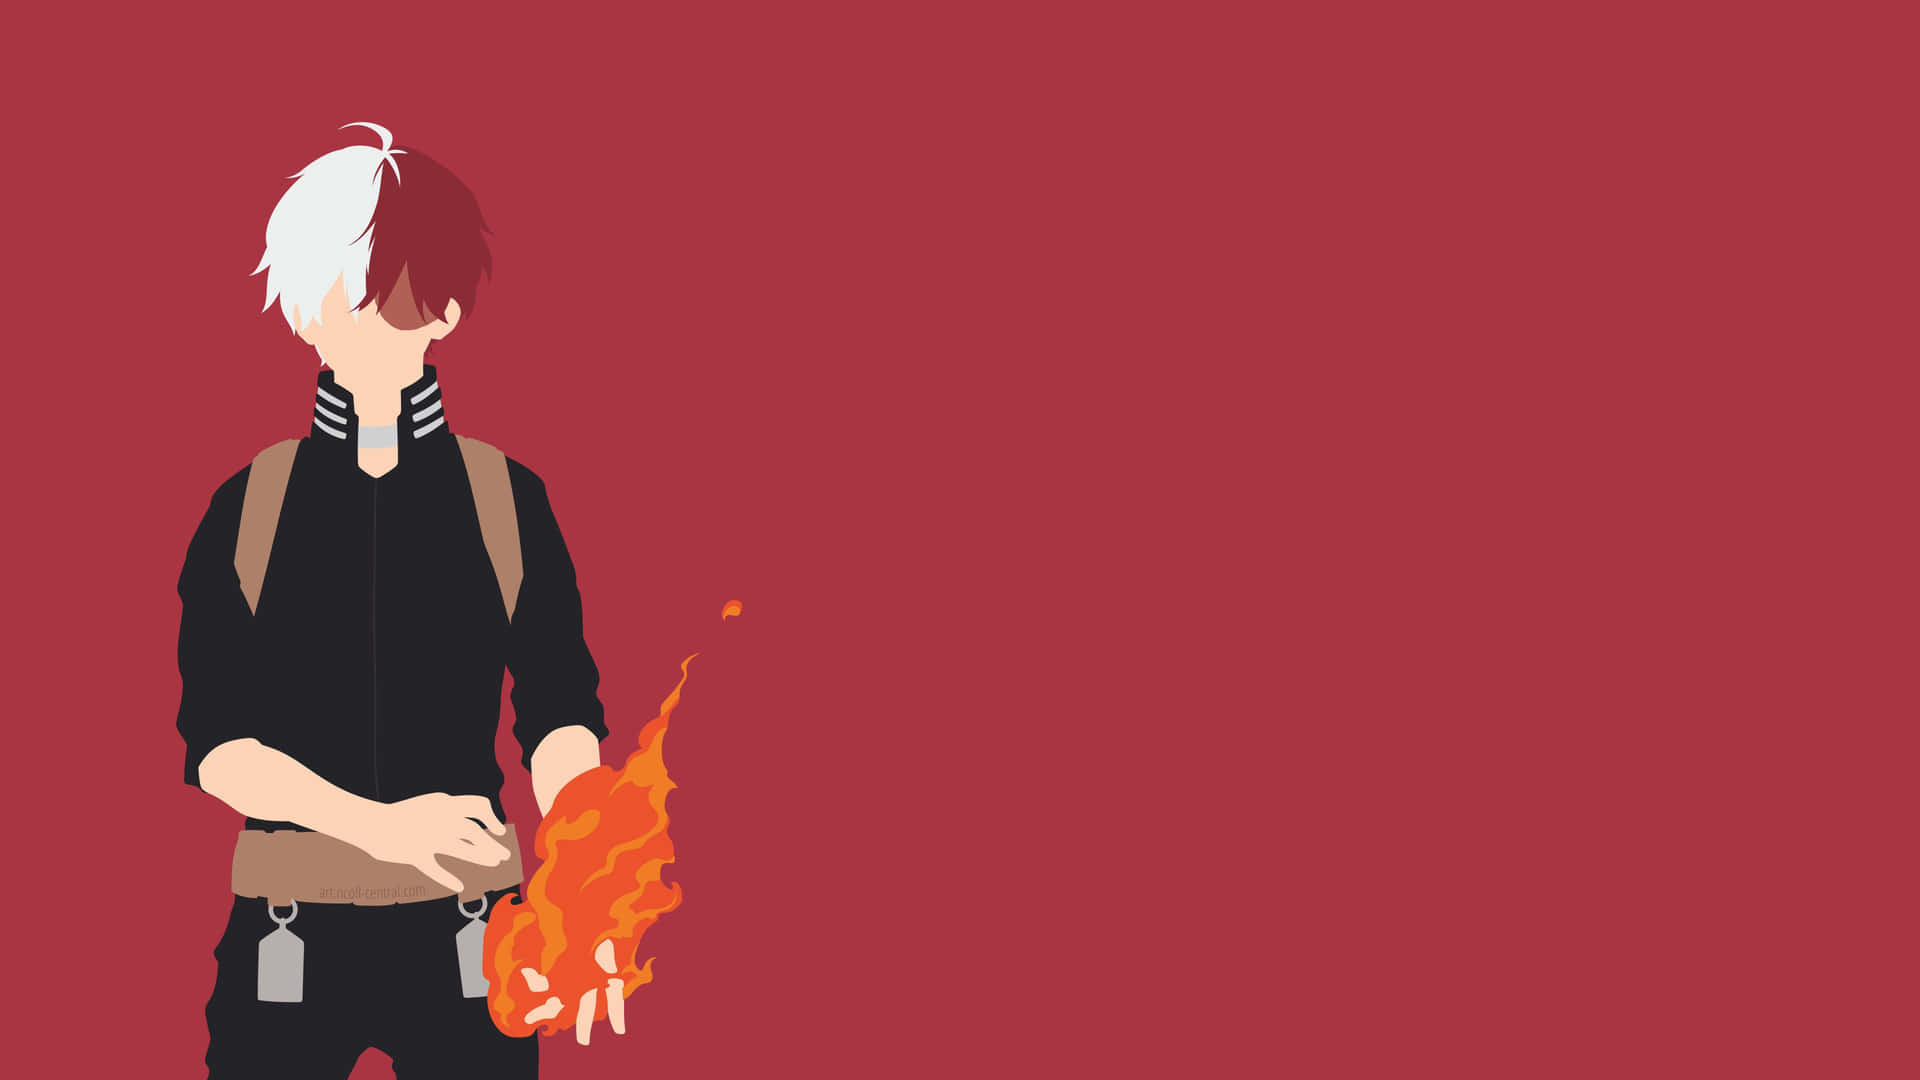 A Character With Red Hair And White Hair Holding A Fire Wallpaper